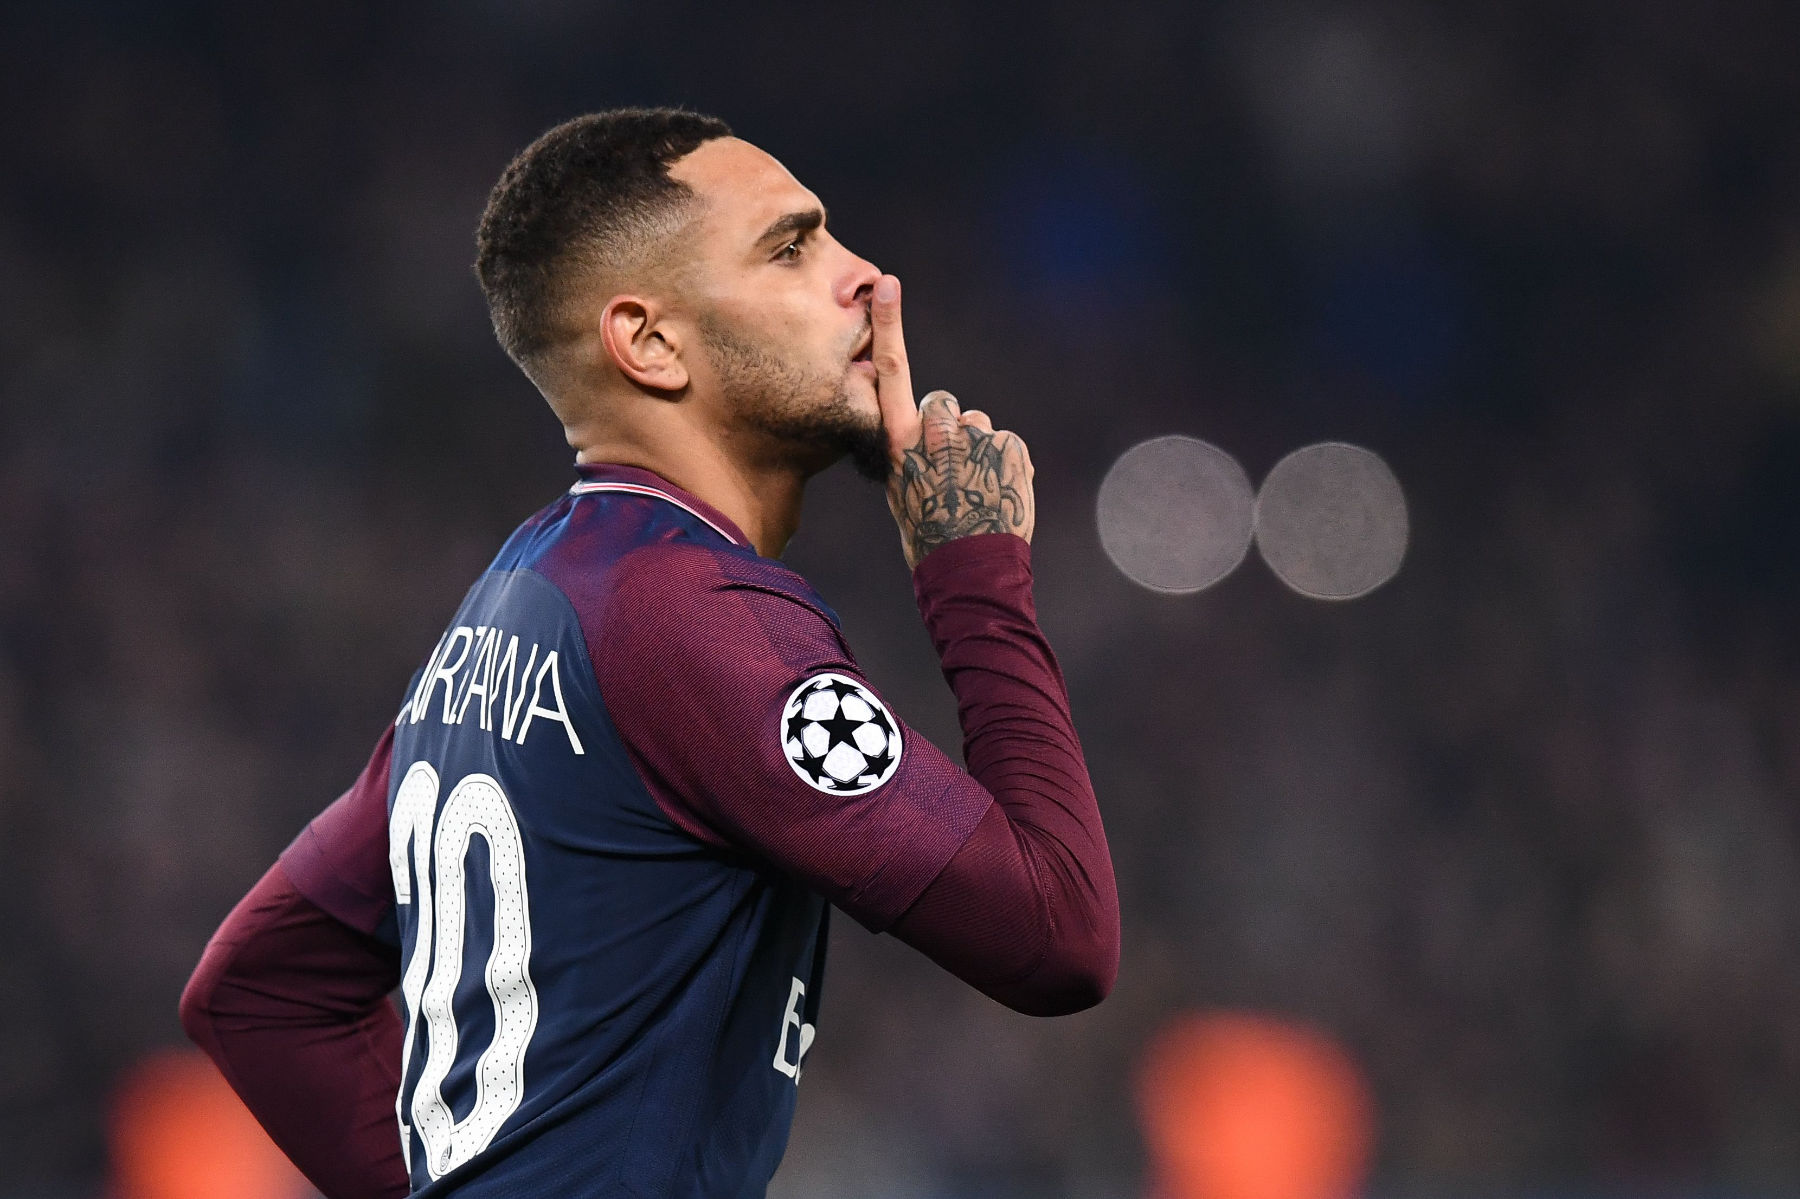 Chelsea have initiated talks with PSG over a loan move for Layvin Kurzawa.